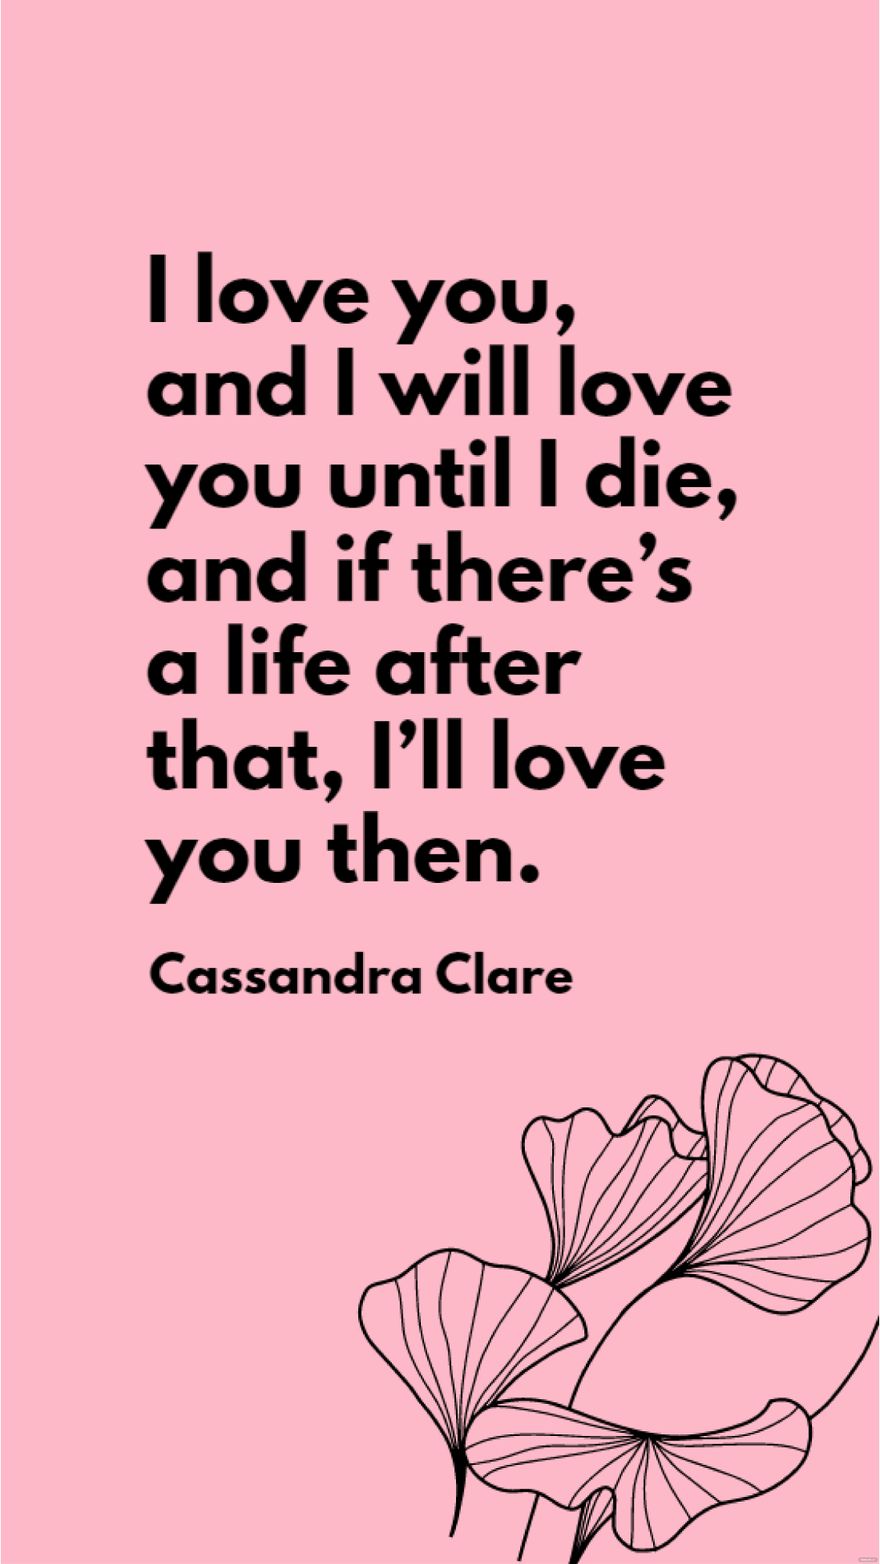 Cassandra Clare - I love you, and I will love you until I die, and if there’s a life after that, I’ll love you then.